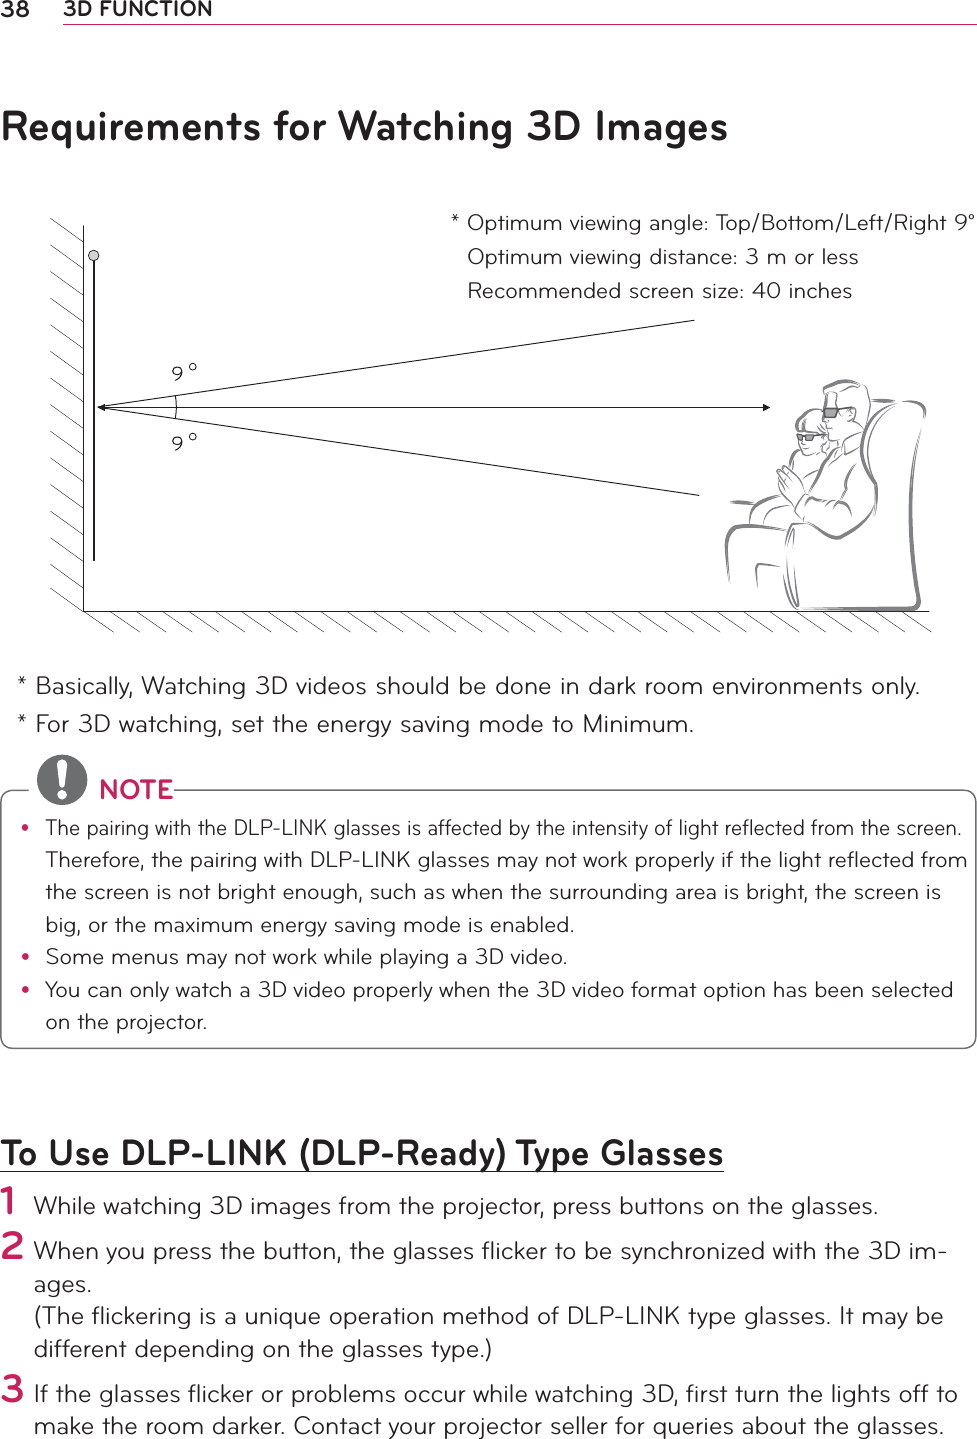 38 3D FUNCTIONRequirements for Watching 3D Images* Basically, Watching 3D videos should be done in dark room environments only. * For 3D watching, set the energy saving mode to Minimum.To Use DLP-LINK (DLP-Ready) Type Glasses1 While watching 3D images from the projector, press buttons on the glasses.2  When you press the button, the glasses ﬂicker to be synchronized with the 3D im-ages. (The ﬂickering is a unique operation method of DLP-LINK type glasses. It may be different depending on the glasses type.) 3 If the glasses ﬂicker or problems occur while watching 3D, ﬁrst turn the lights off to make the room darker. Contact your projector seller for queries about the glasses.  *  Optimum viewing angle: Top/Bottom/Left/Right 9°Optimum viewing distance: 3 m or lessRecommended screen size: 40 inches NOTEy The pairing with the DLP-LINK glasses is affected by the intensity of light reflected from the screen. Therefore, the pairing with DLP-LINK glasses may not work properly if the light reflected from the screen is not bright enough, such as when the surrounding area is bright, the screen is big, or the maximum energy saving mode is enabled.y  Some menus may not work while playing a 3D video.y You can only watch a 3D video properly when the 3D video format option has been selected on the projector.